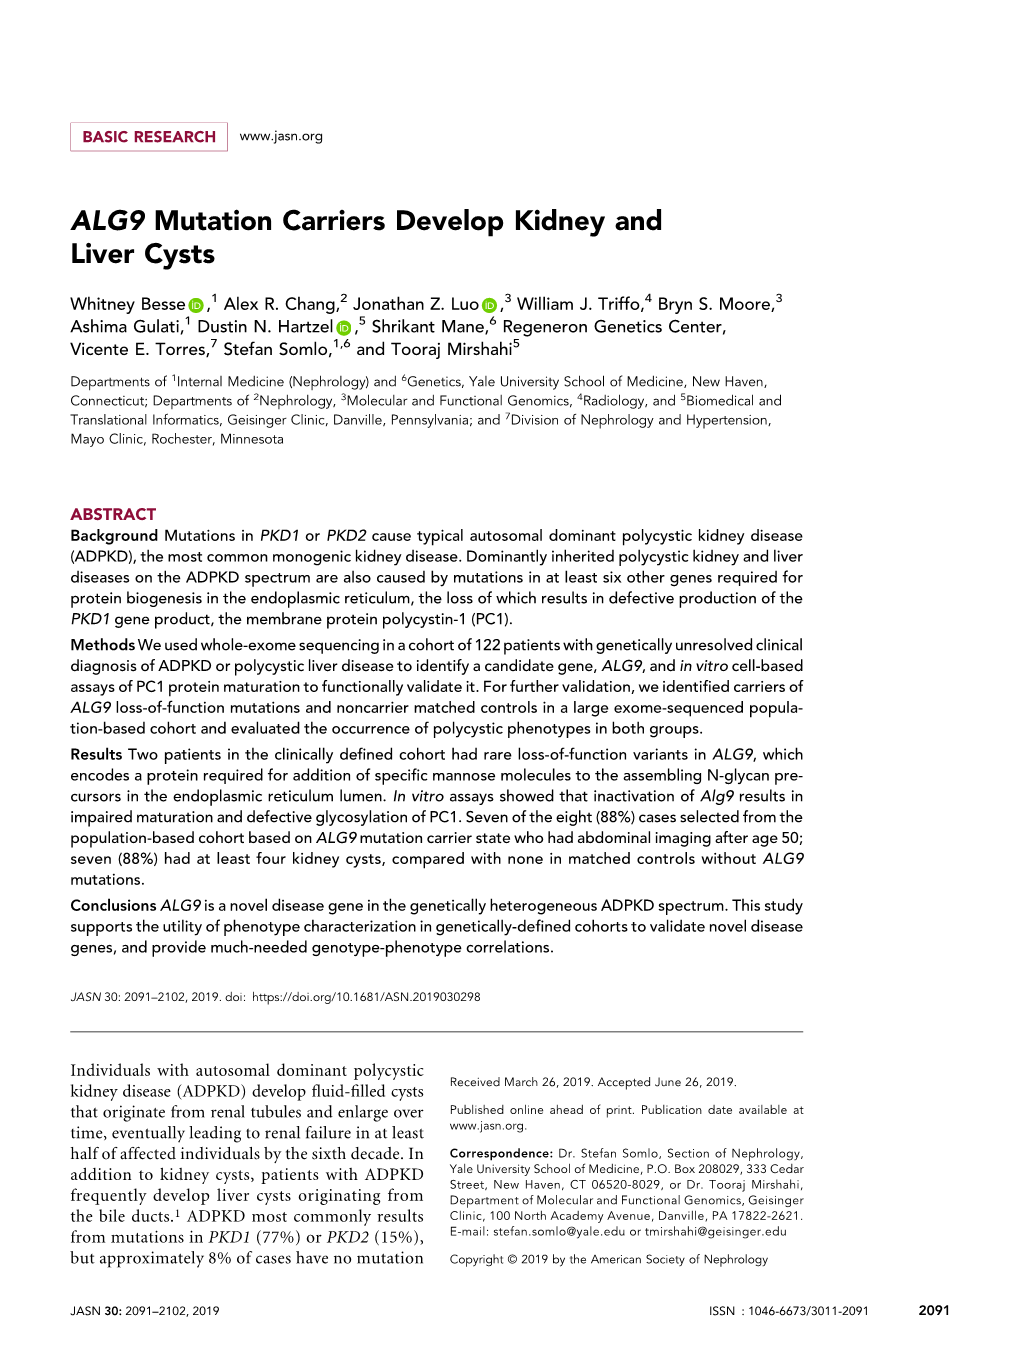 ALG9 Mutation Carriers Develop Kidney and Liver Cysts